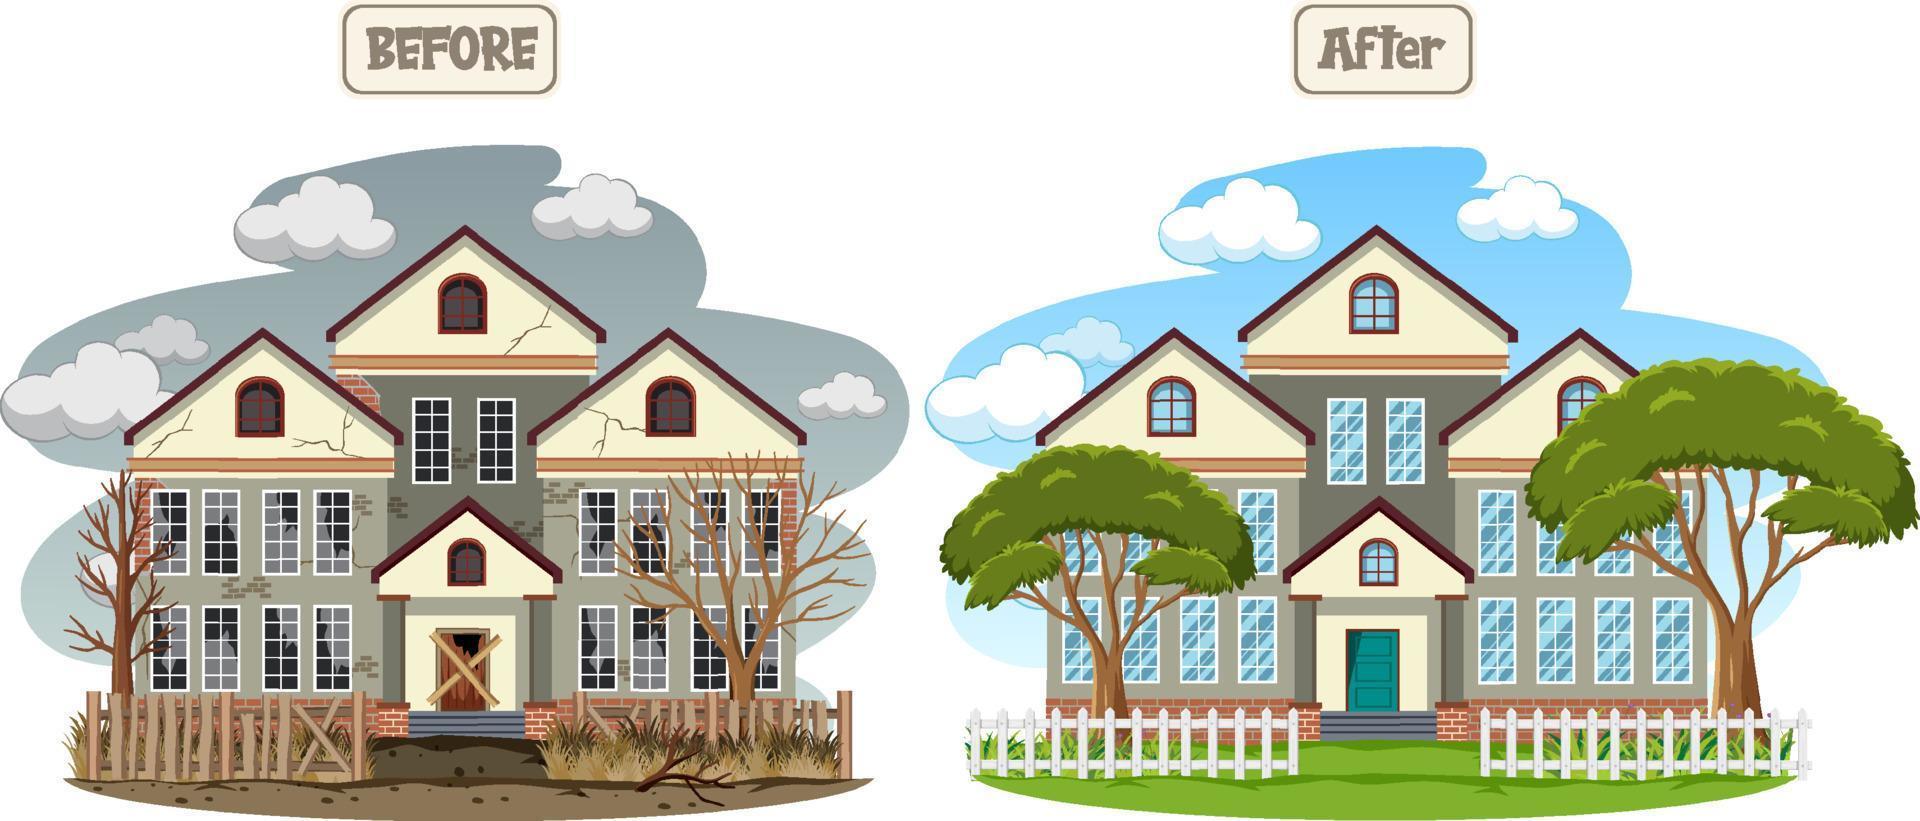 House before and after renovation vector